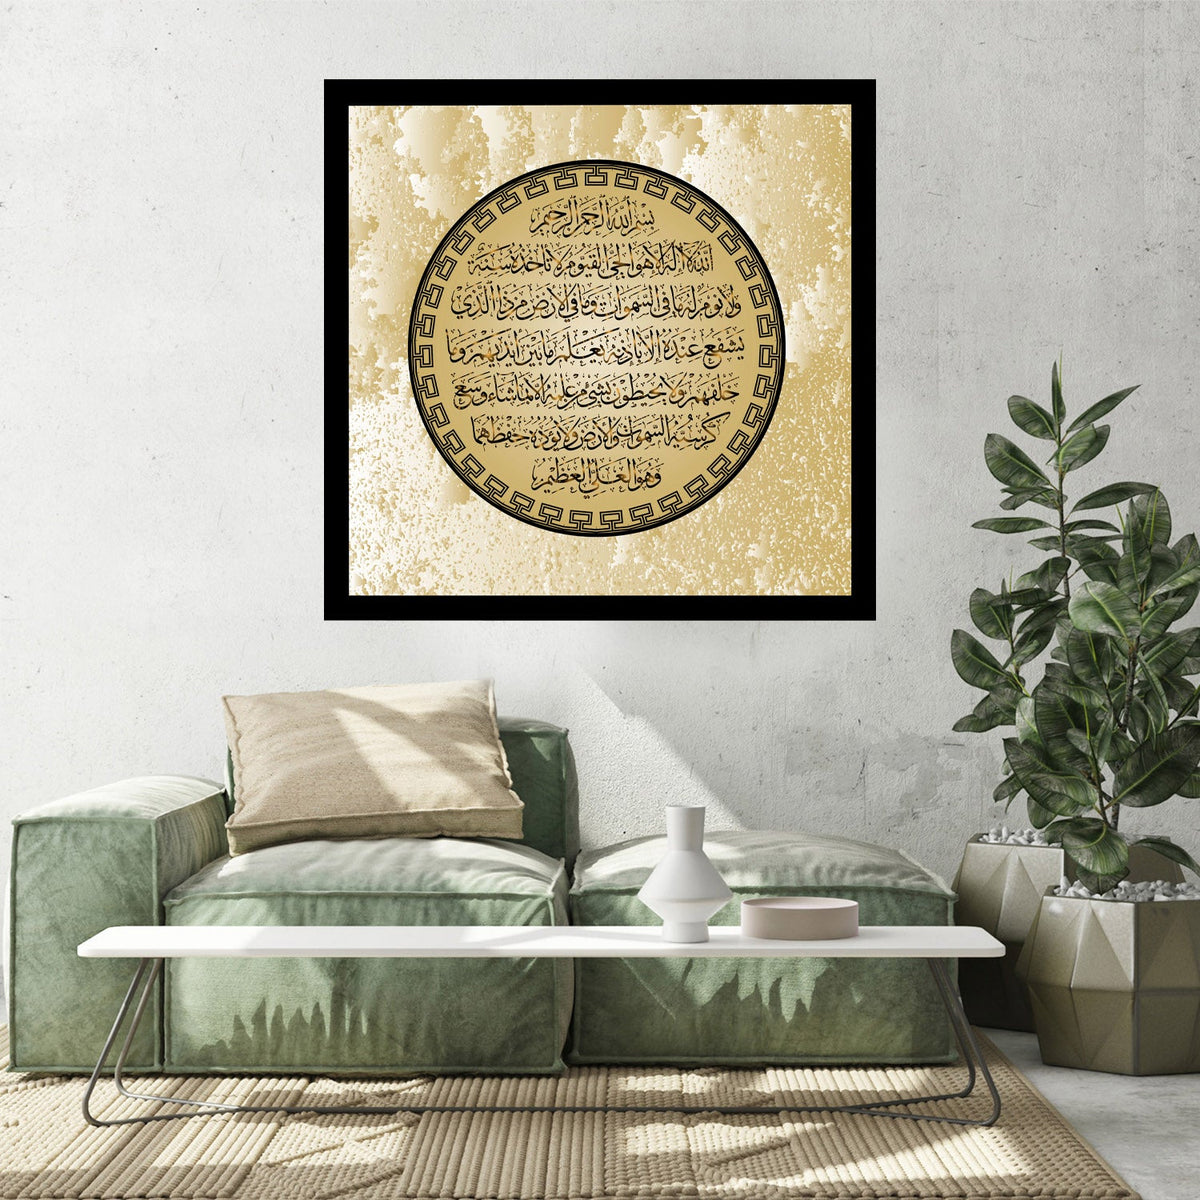 https://cdn.shopify.com/s/files/1/0387/9986/8044/products/255AyahIslamicLimitedEdition10CanvasArtprintStretched-2.jpg